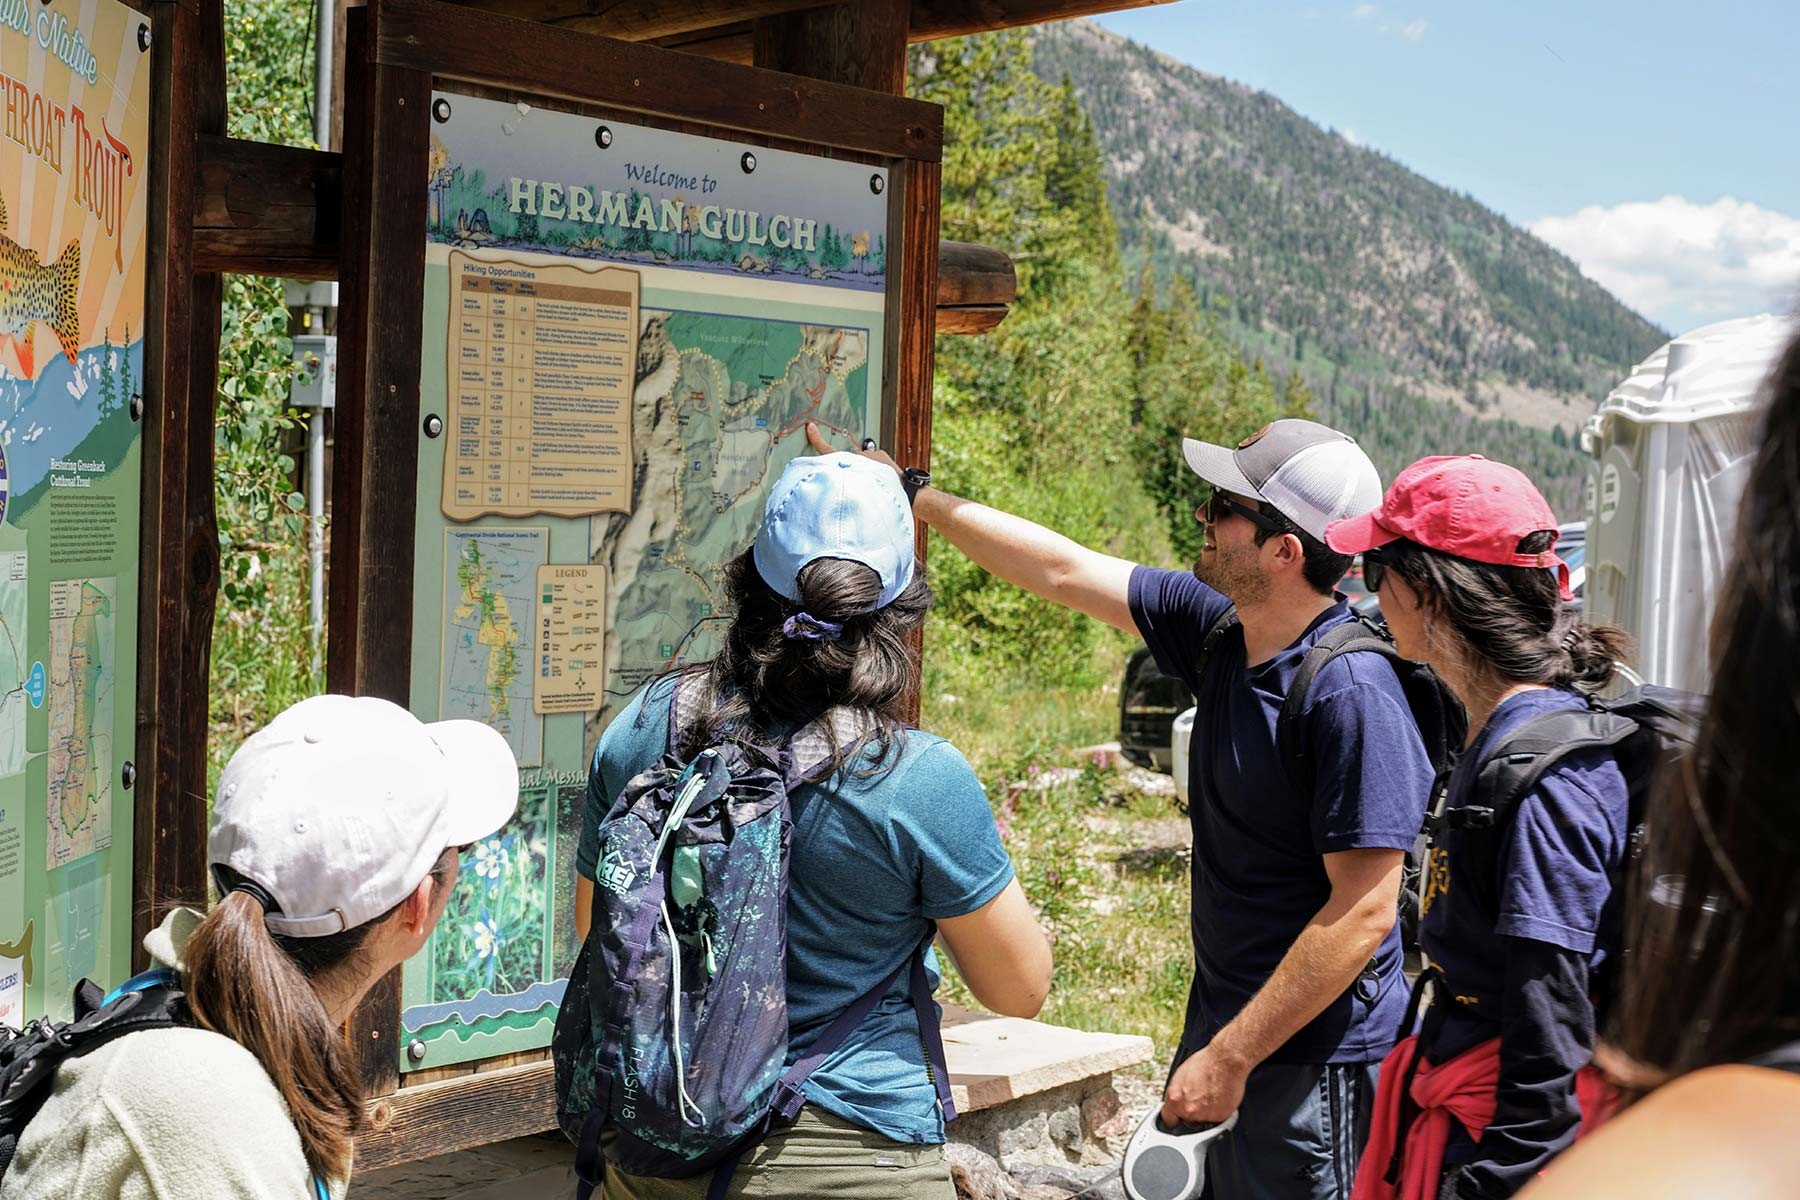 A group of four people wearing baseball caps look over a map of Herman Gulch, flanked by rocky hills. 